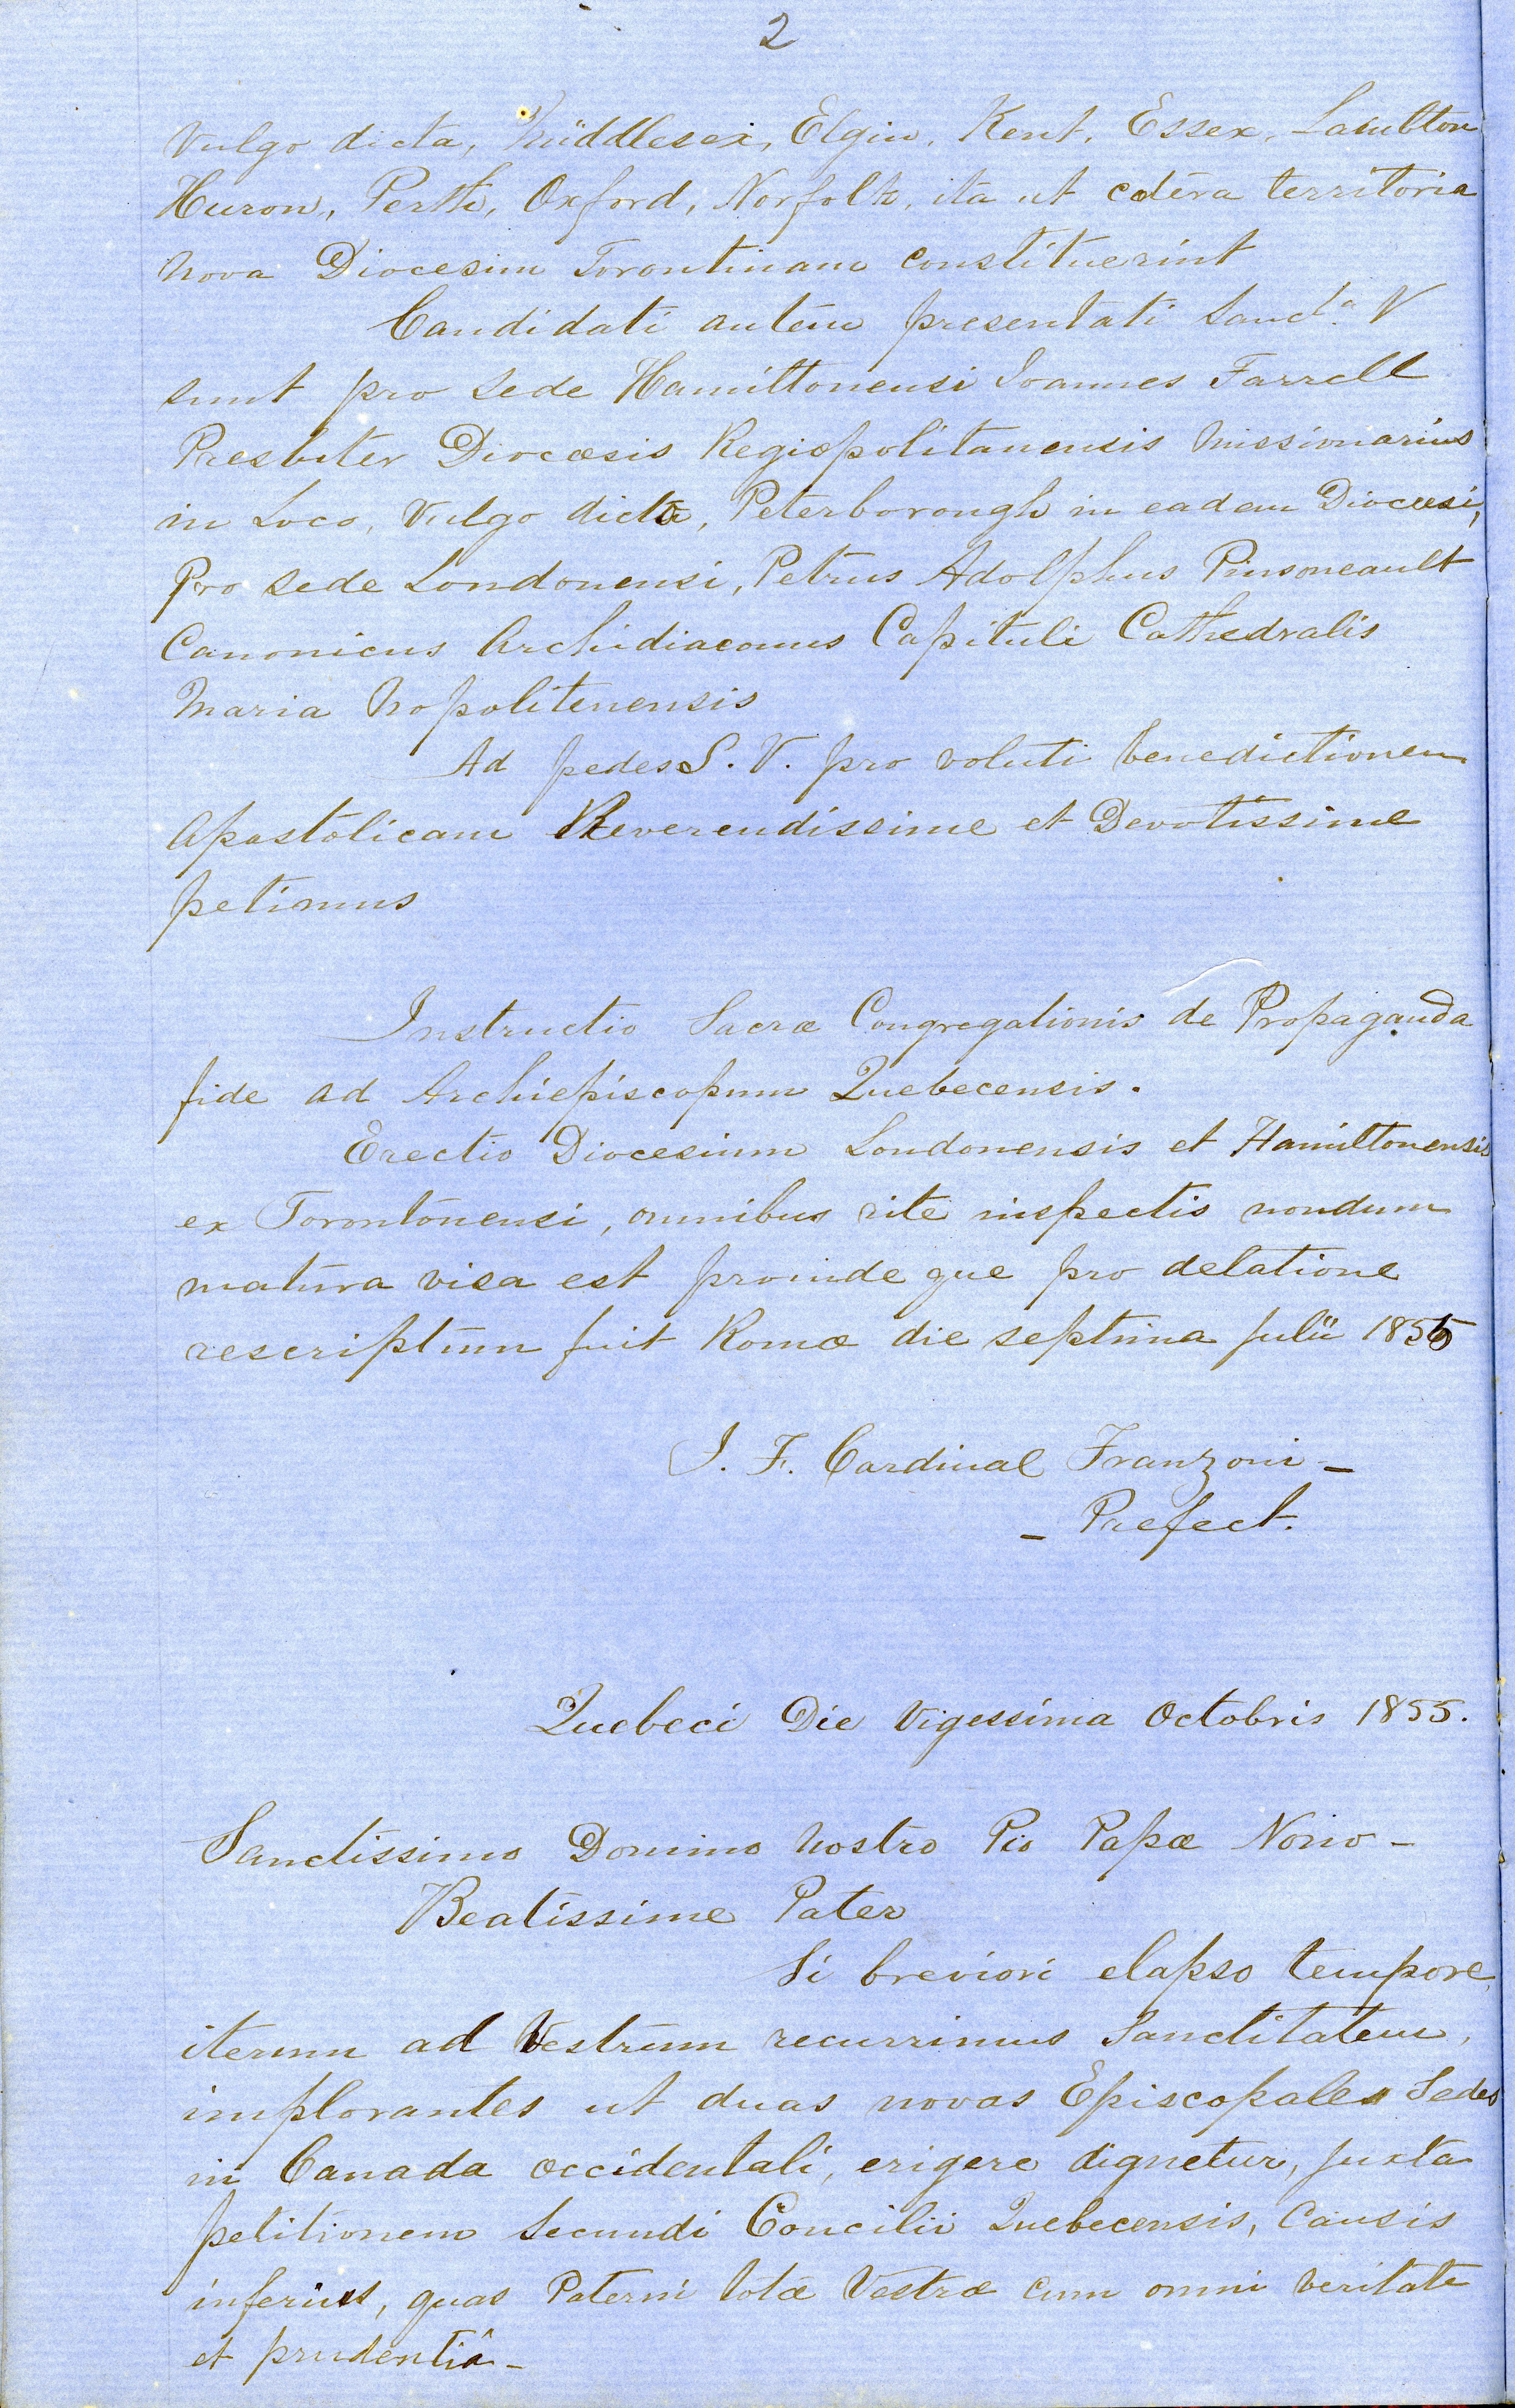 Photograph of the second page of a letter from the Bishops of Quebec to the Sacred Congregation for the Propagation of Faith in Rome, June 3, 1854 . The letter is hand written in cursive in Latin on blue paper.